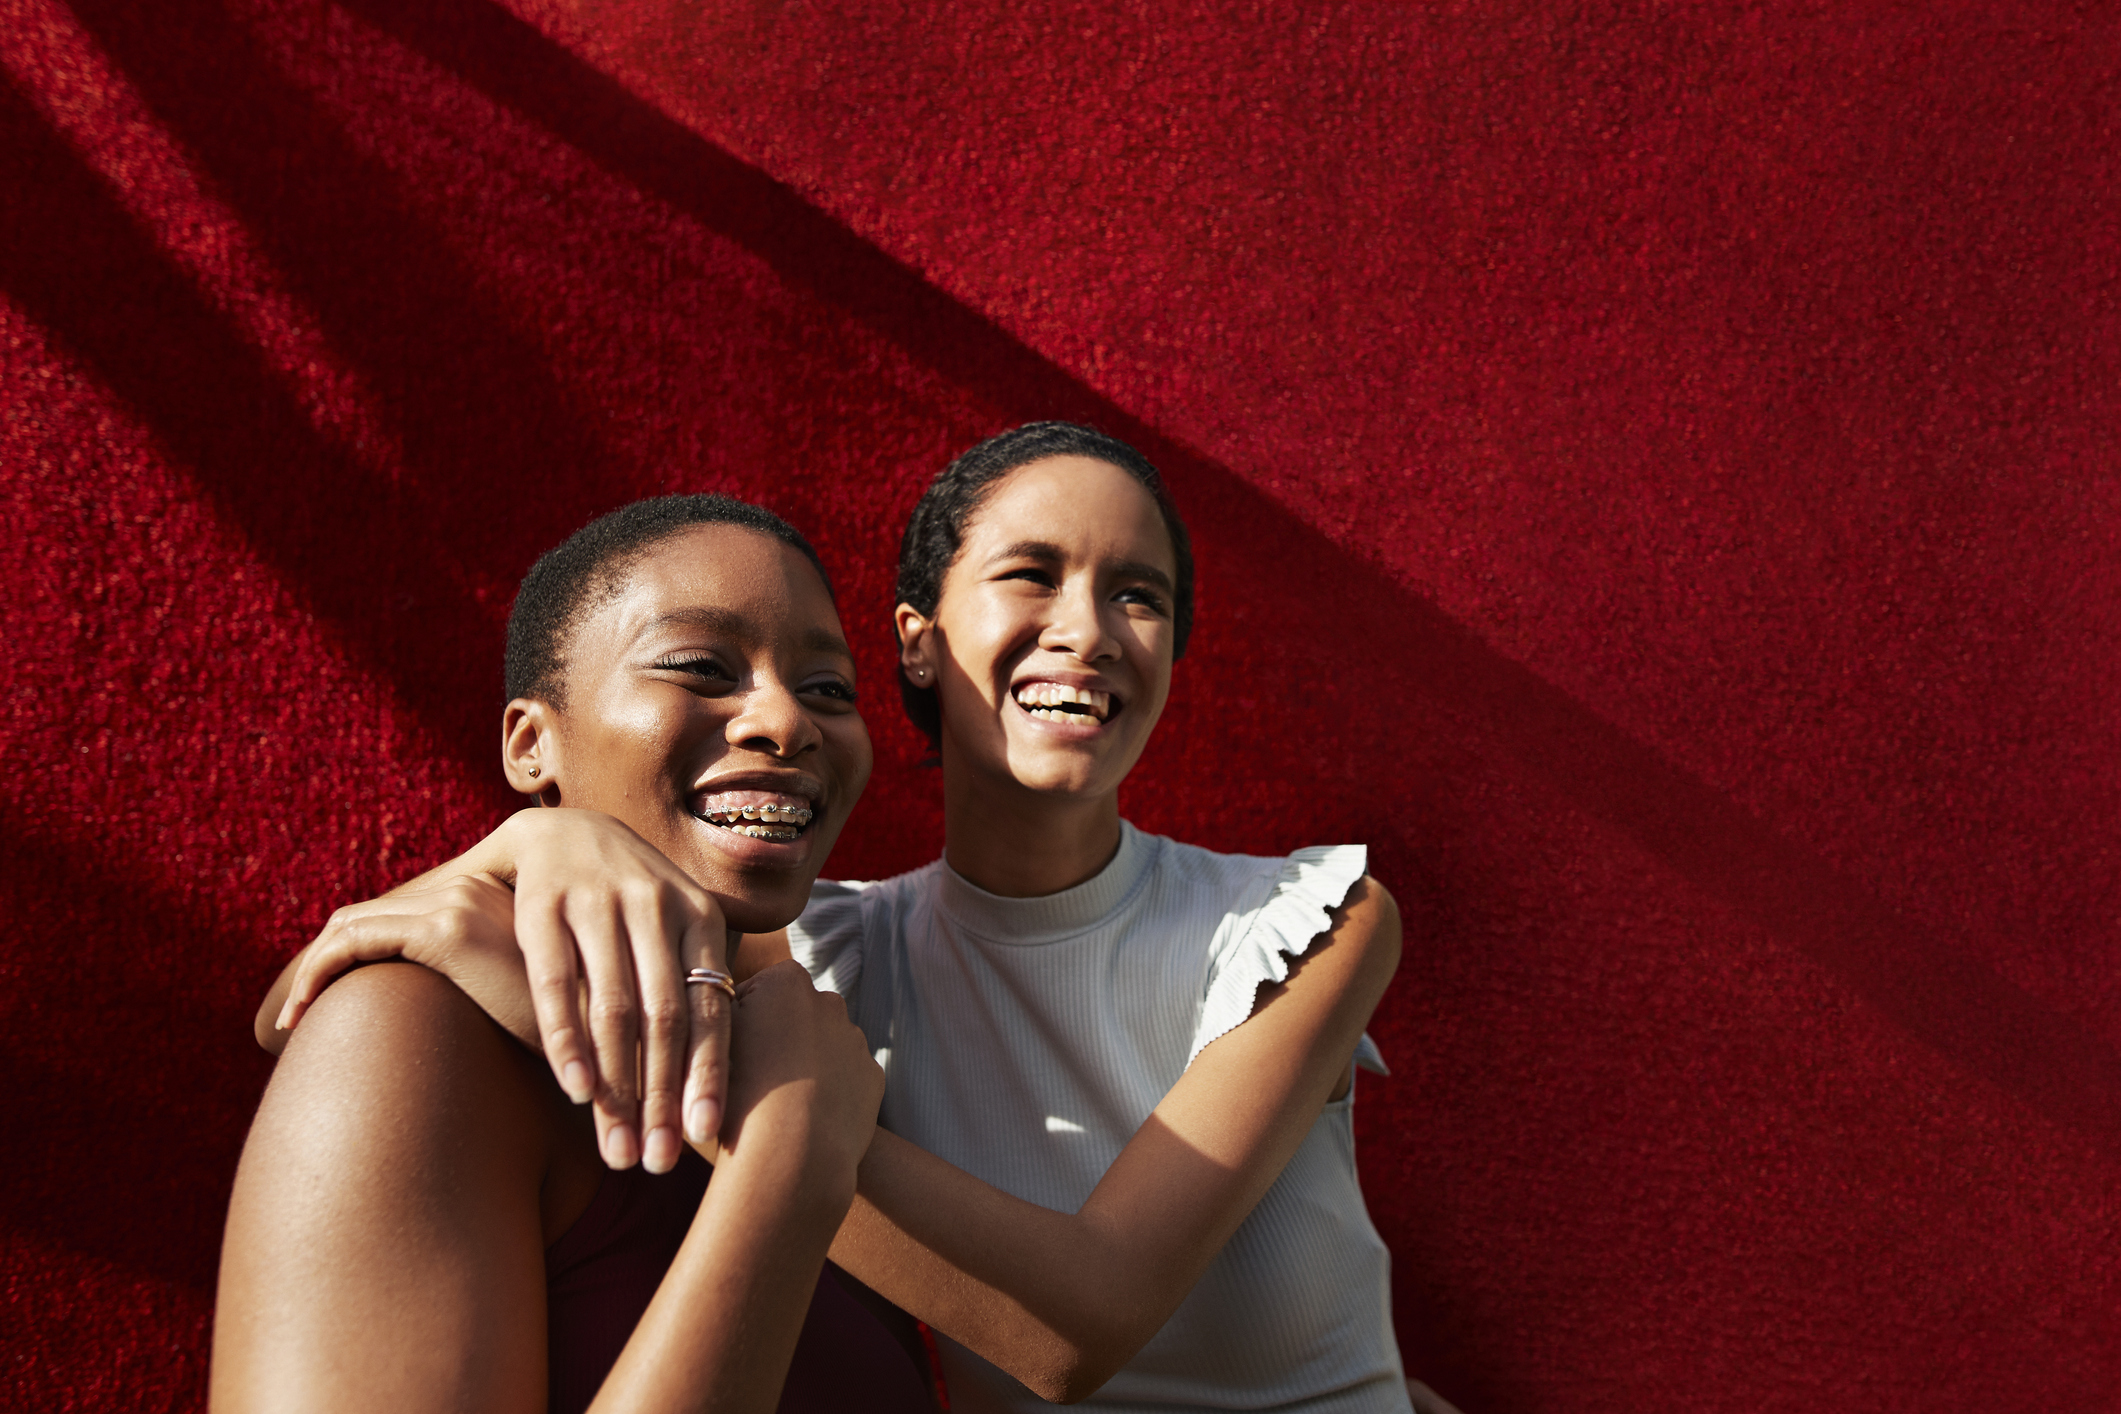 Smiling young woman standing with female friend against red wall.